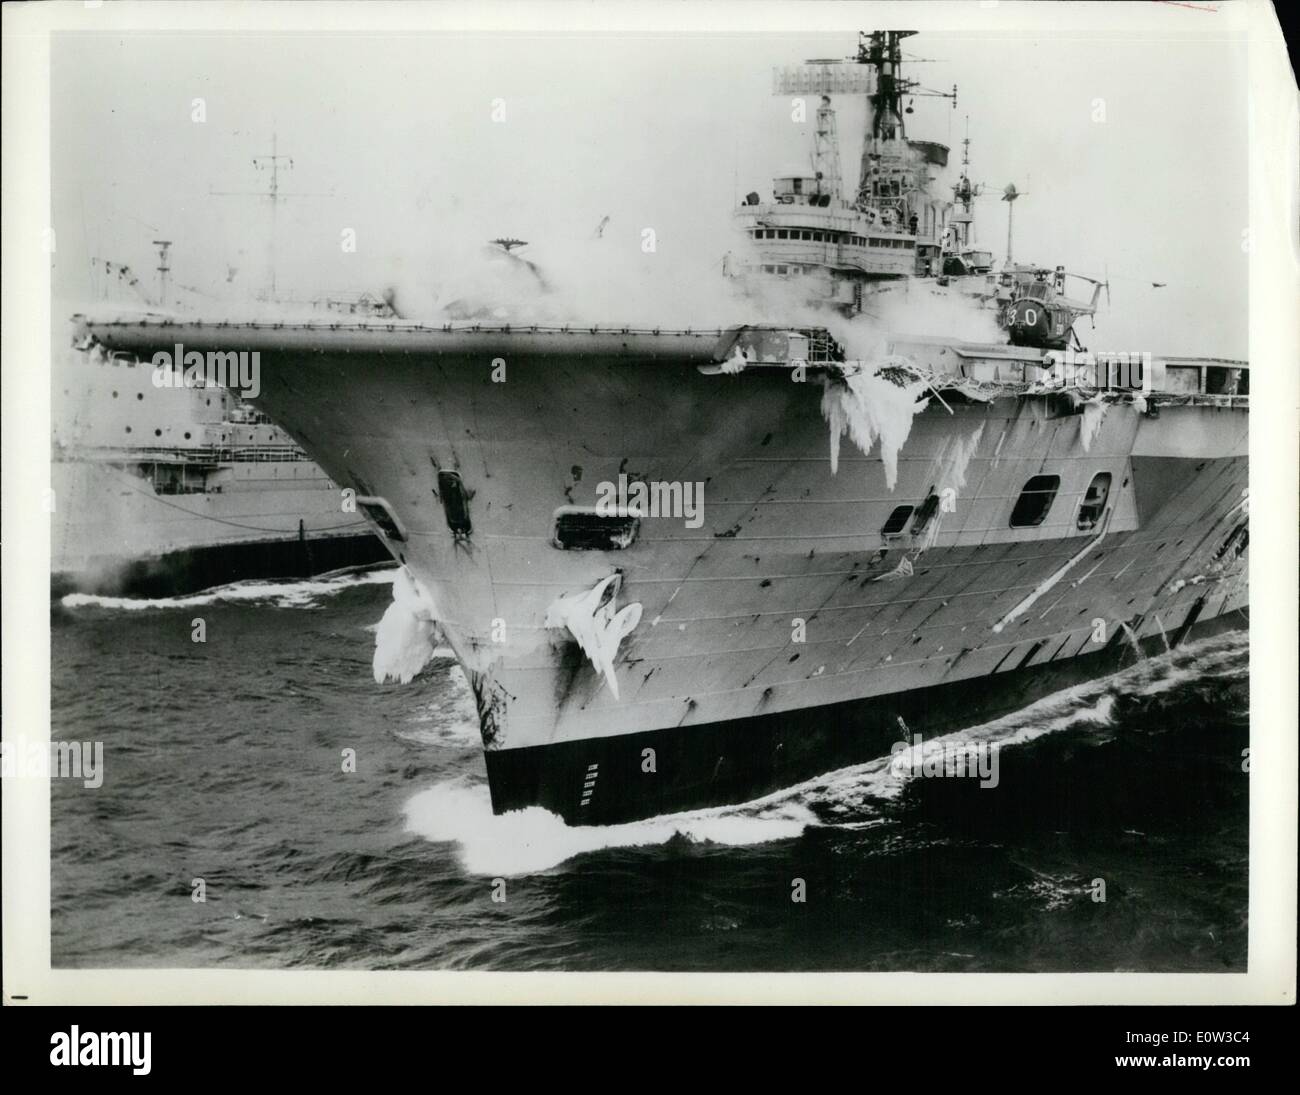 Mar. 03, 1961 - Icy Ark: Storm-Tossed Tanker: H.N.S. Ark Royal, 50,000 tons, Britain's largest aircraft carrier, carries out cold-weather flying trials in the Davis Strait, West of Greenland, following which she visited the United States (New York City) on her way back to Britain. Pictured is ice decorating her superstructure while steam from her catapult and the exhausts of her jet aircraft produce a fog on deck. Stock Photo